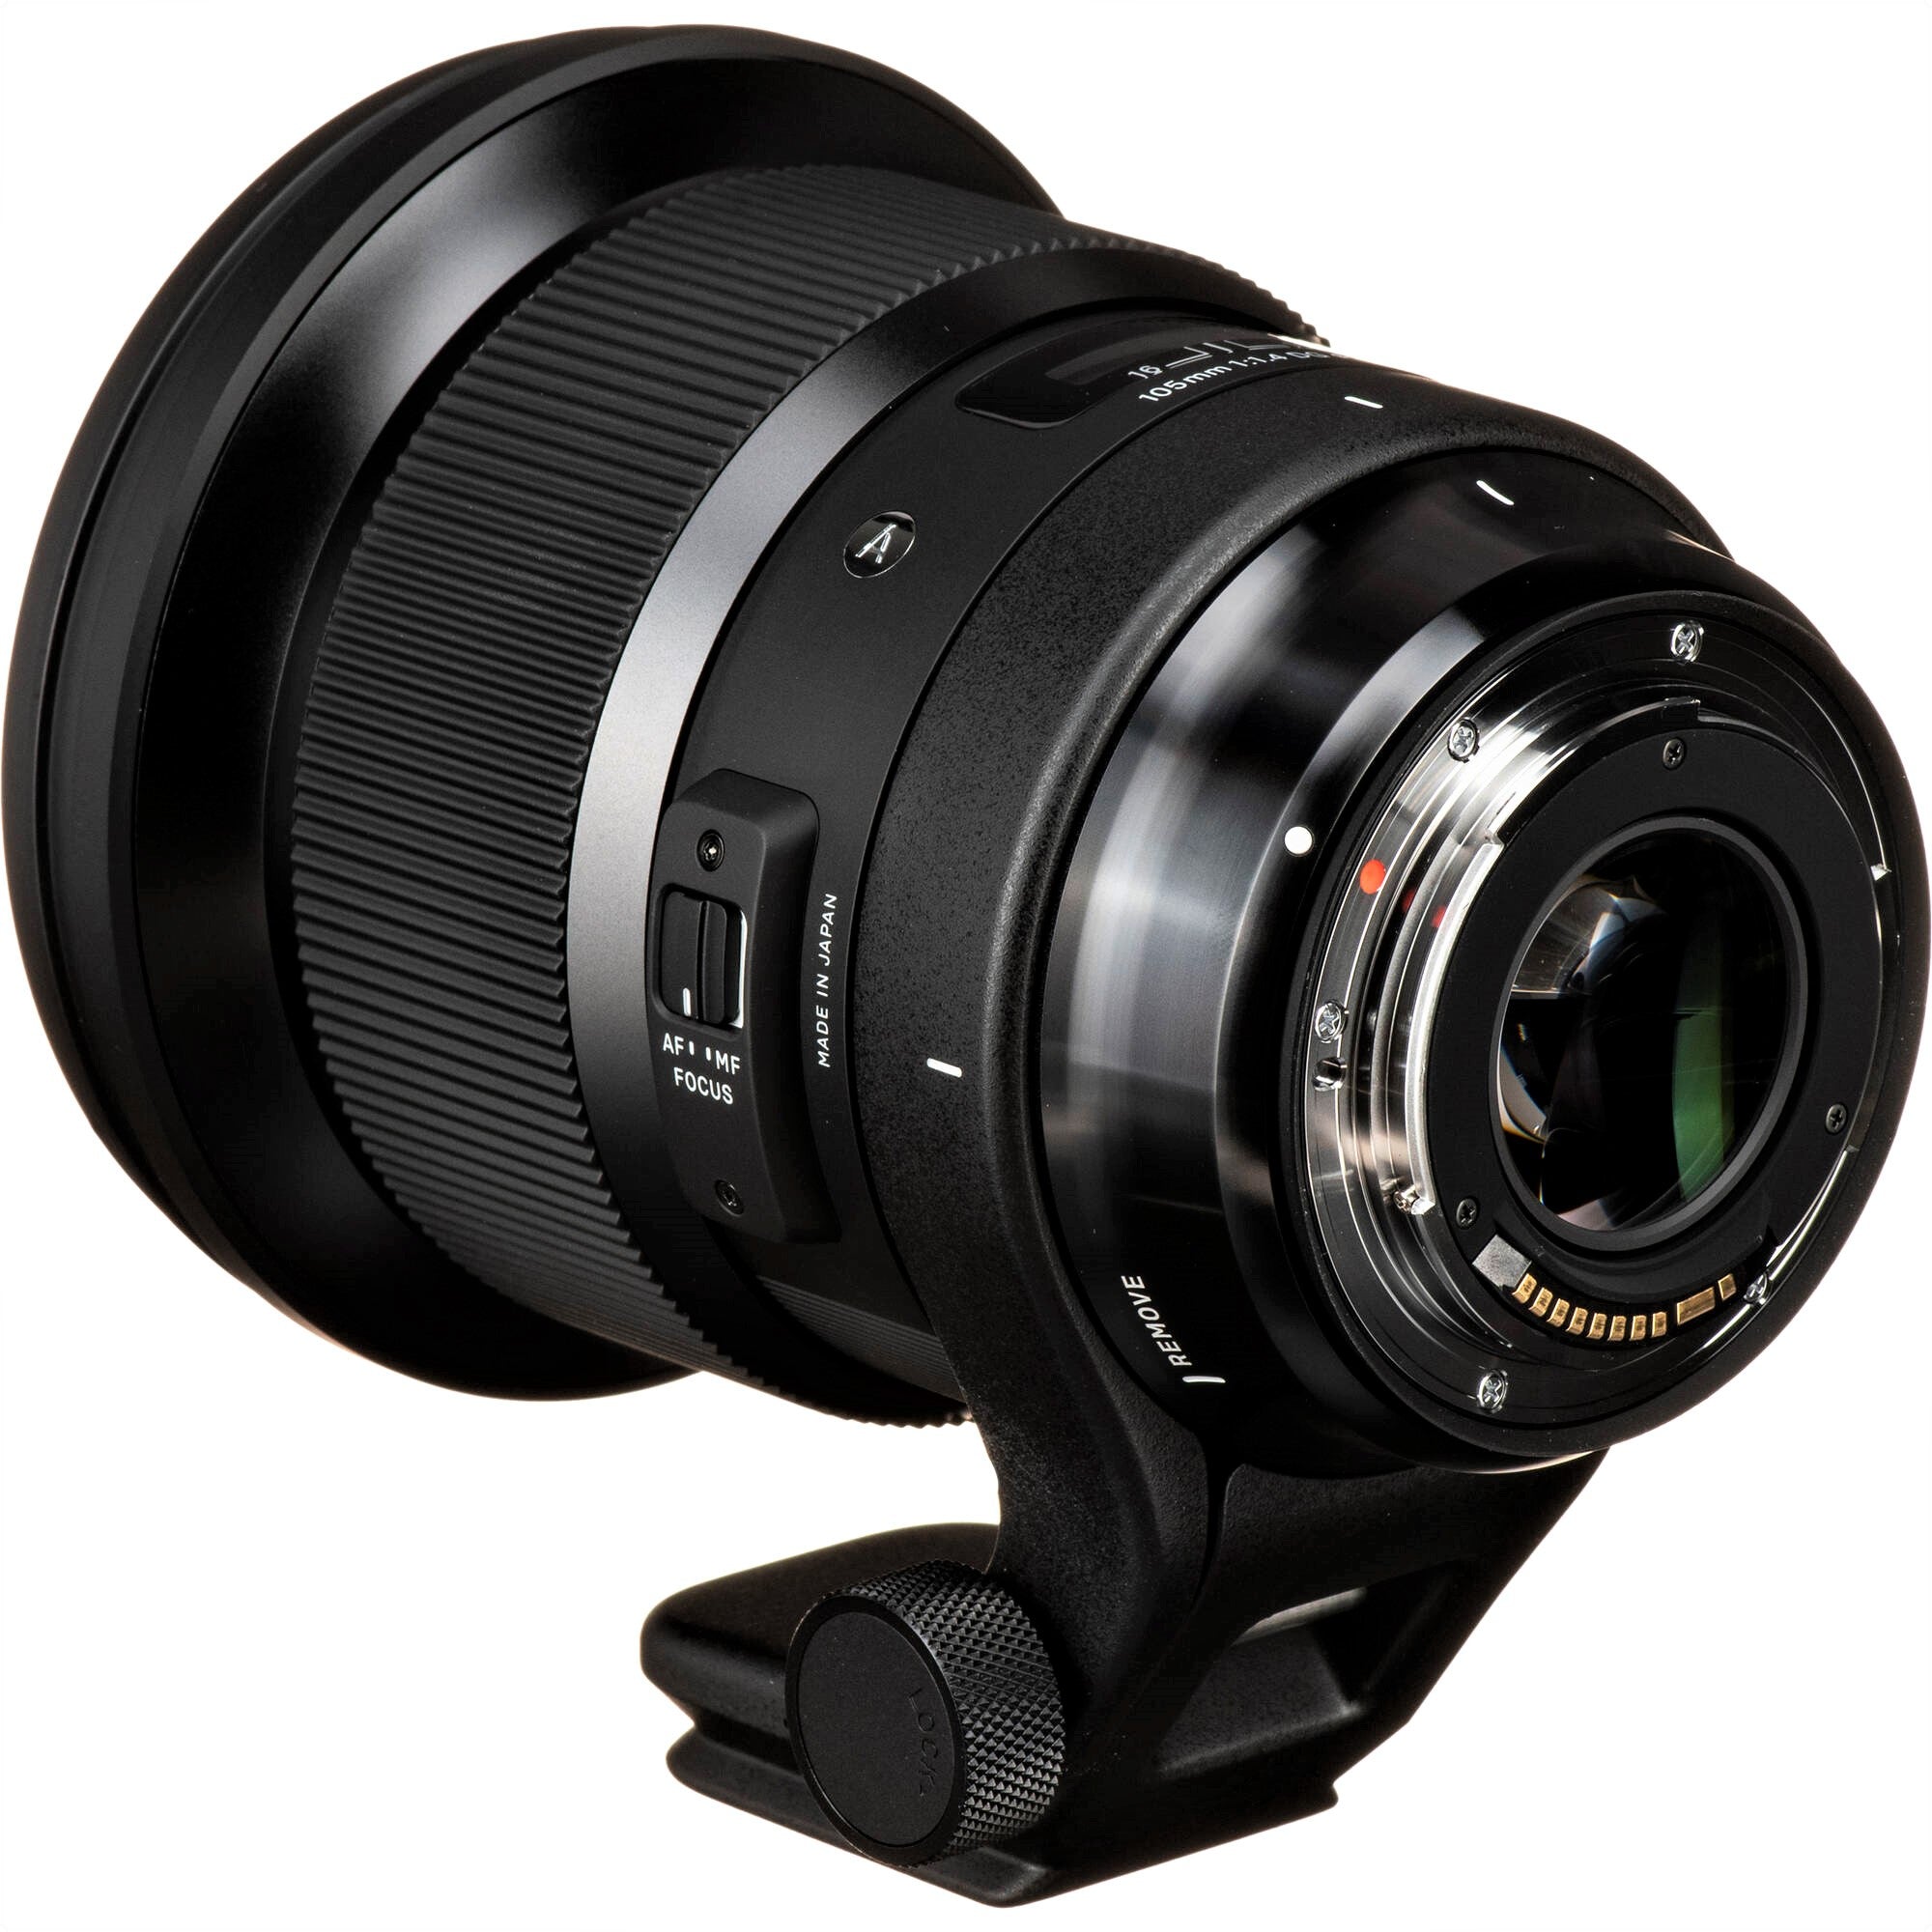 Sigma 105mm F1.4 DG HSM Art Lens for Canon EF in a Back-Side View